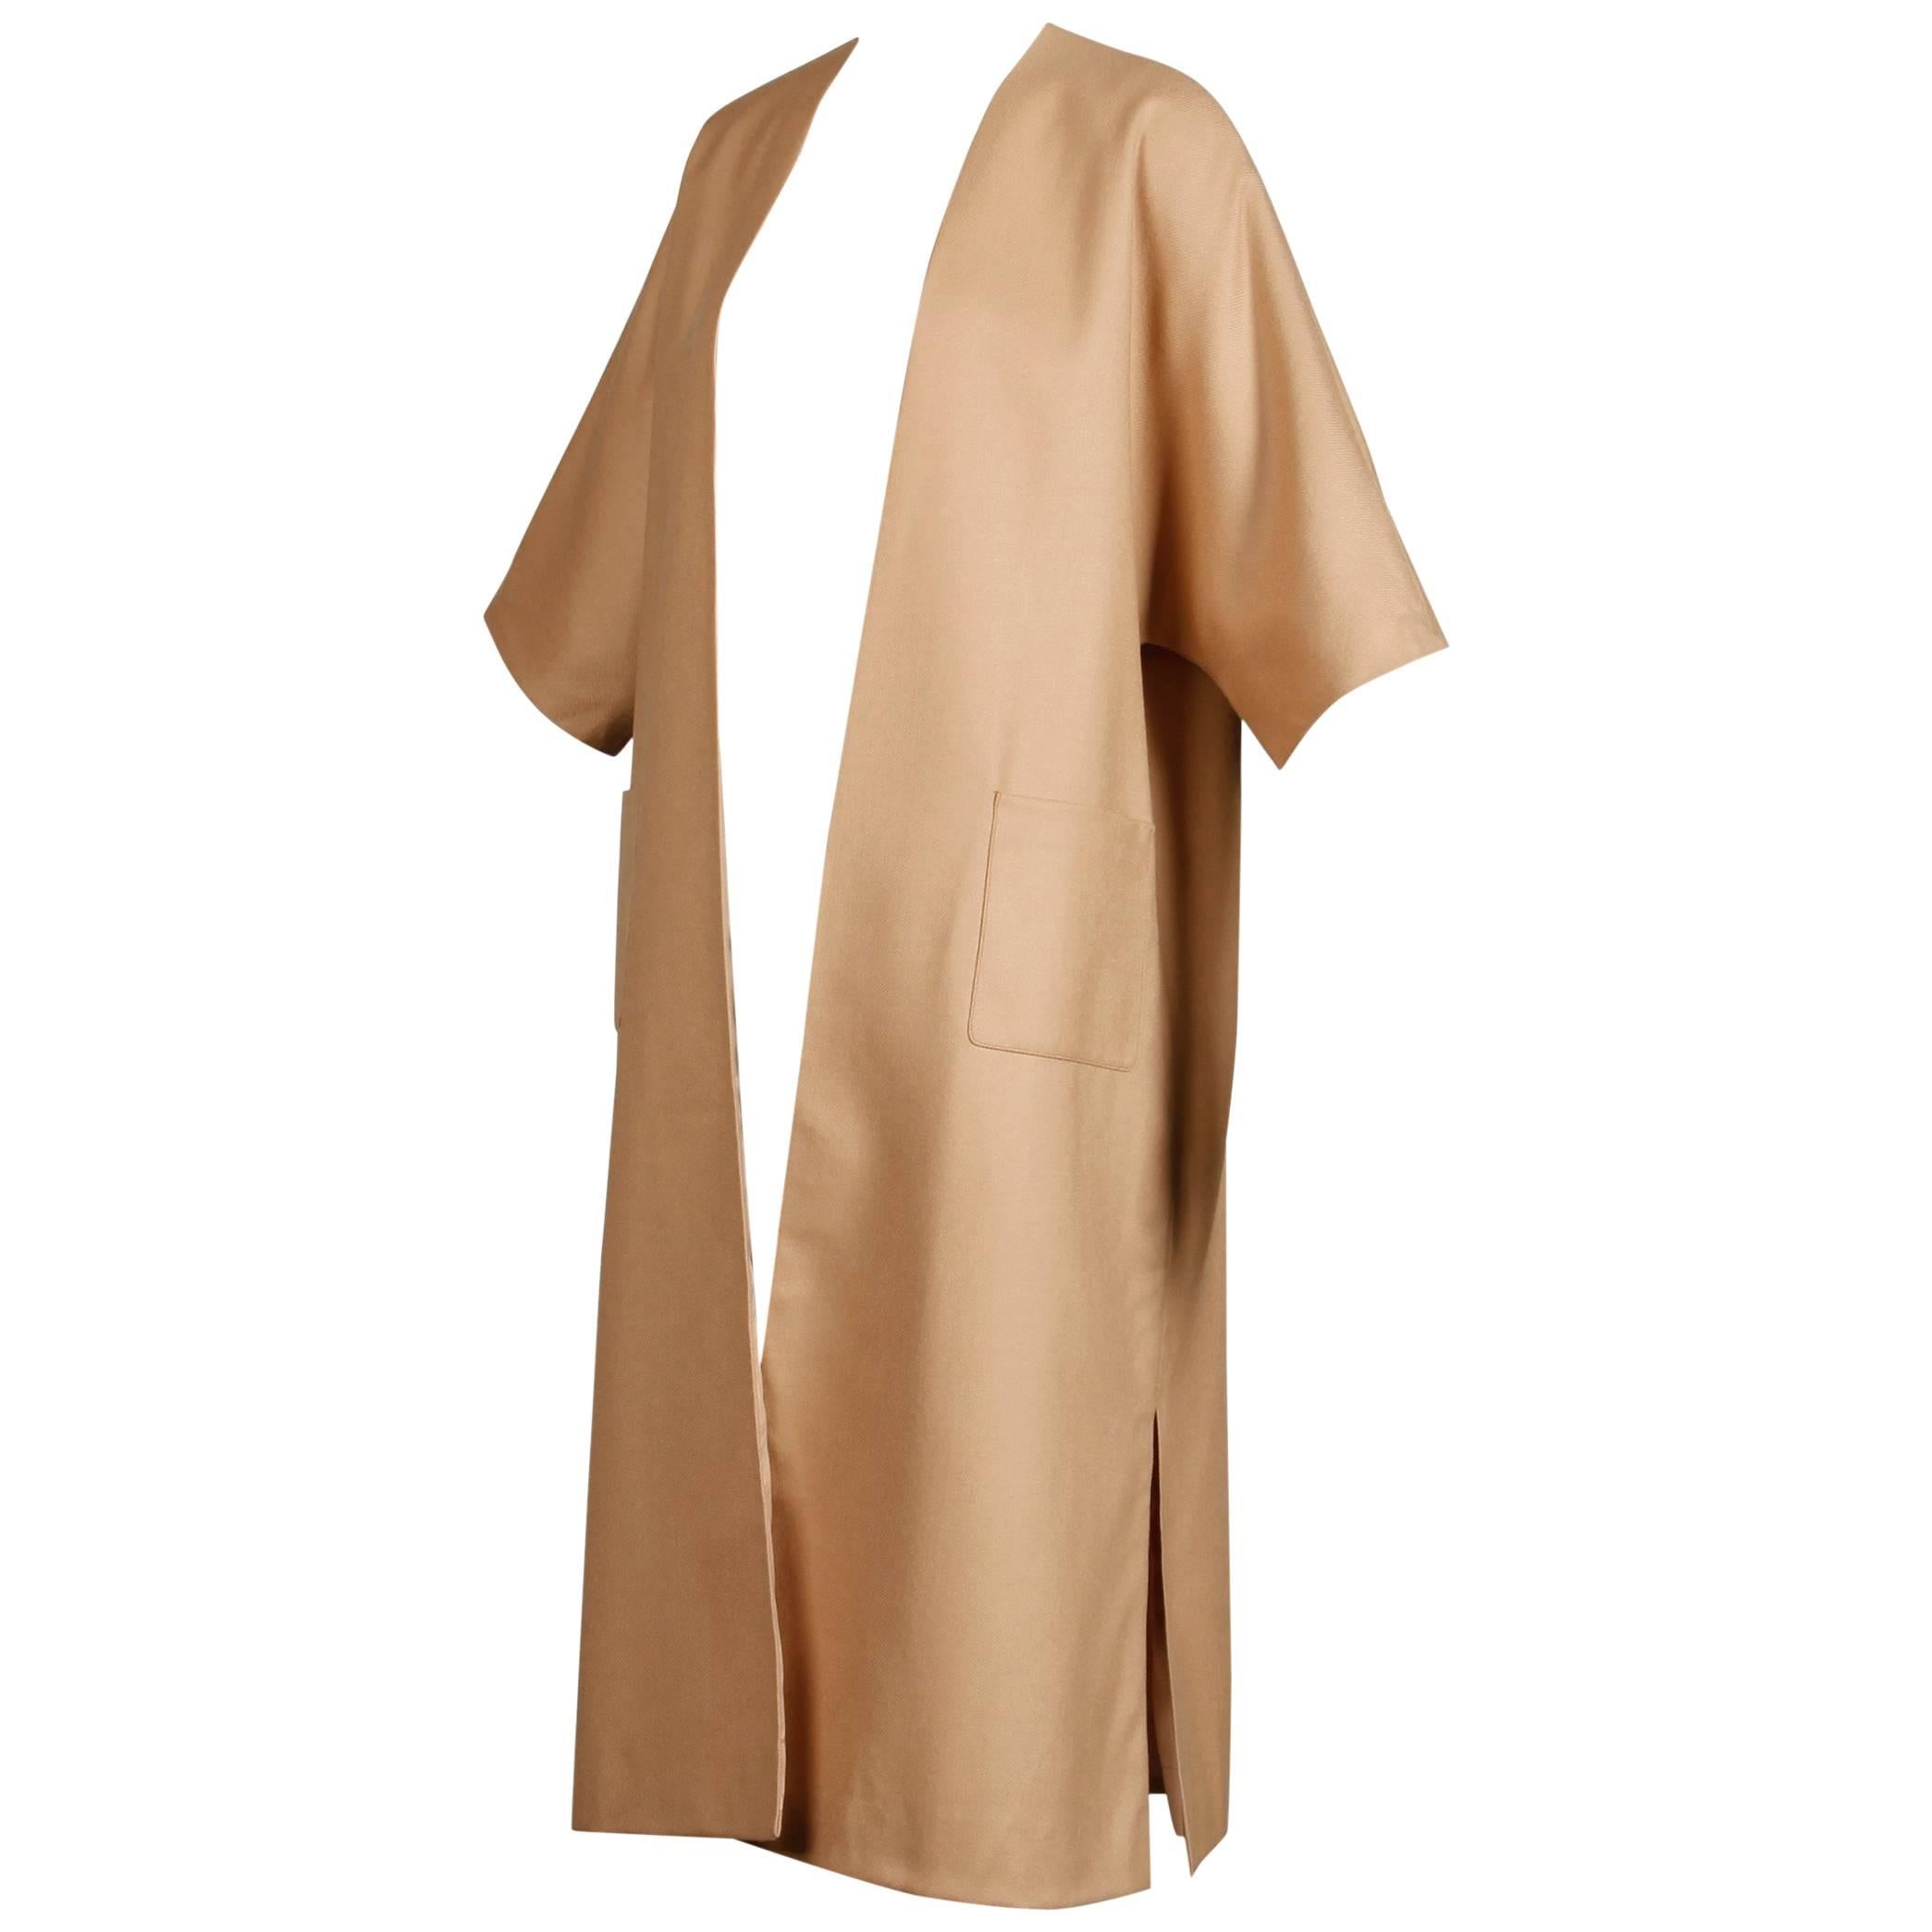 Unworn with Tags 1970s Vintage Camel Wool Maxi Coat or Duster with 3/4 Sleeves